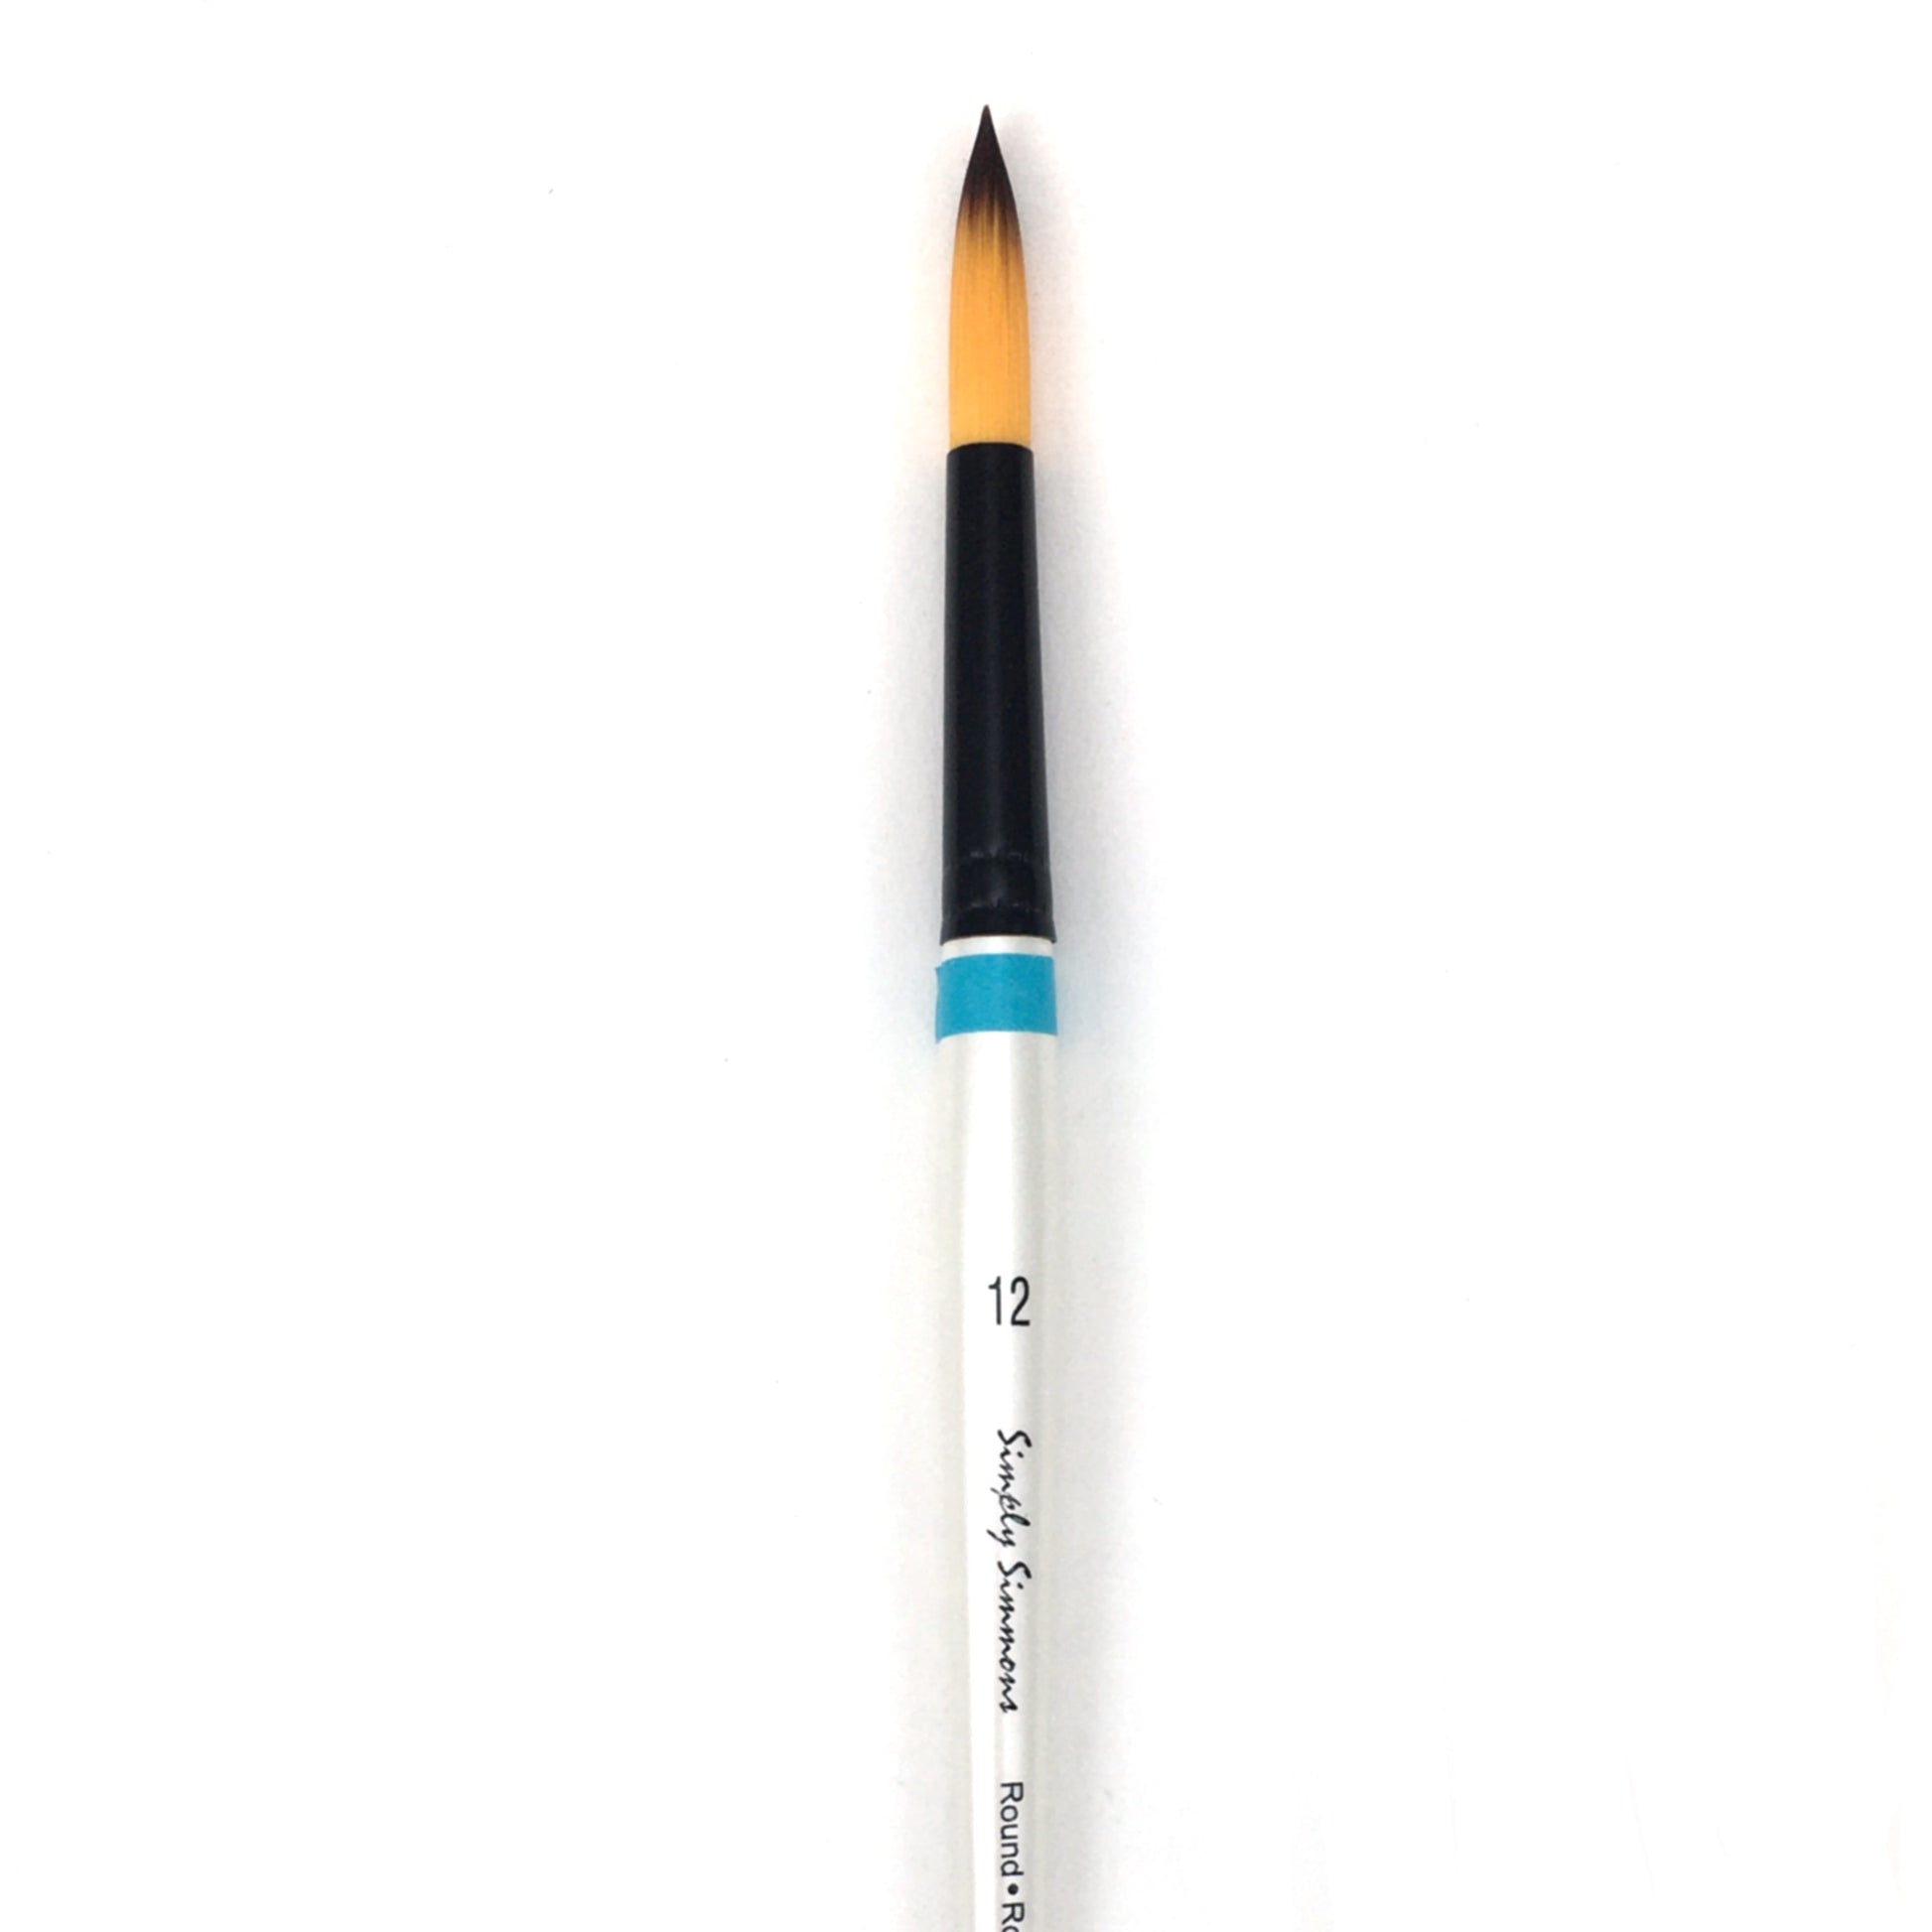 Simply Simmons Watercolor Brush - Short Handle - Round / - #12 / - synthetic by Robert Simmons - K. A. Artist Shop